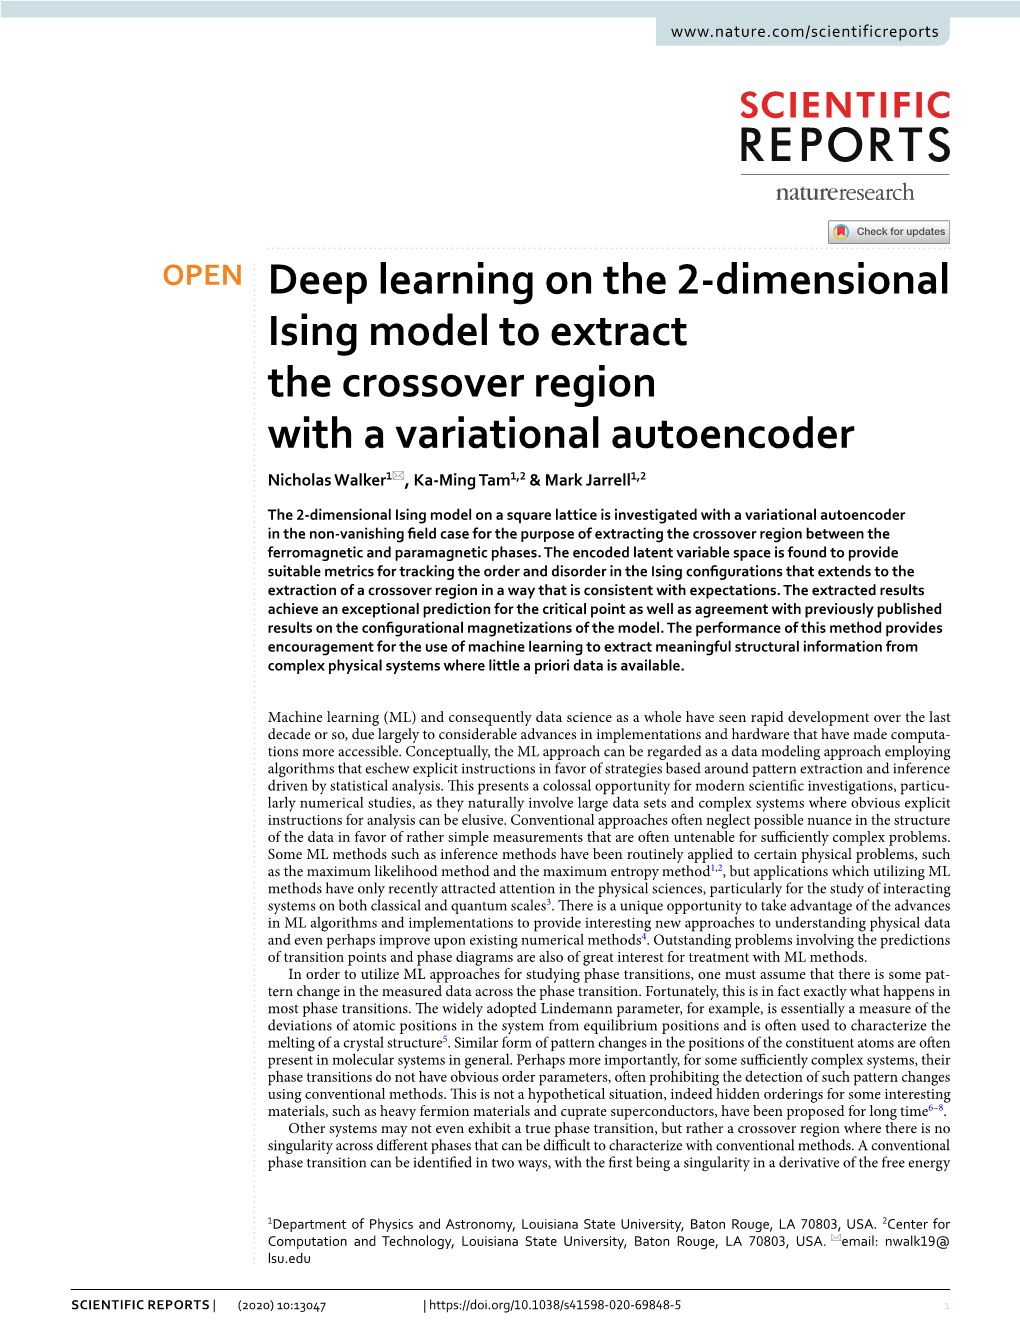 Deep Learning on the 2-Dimensional Ising Model to Extract the Crossover